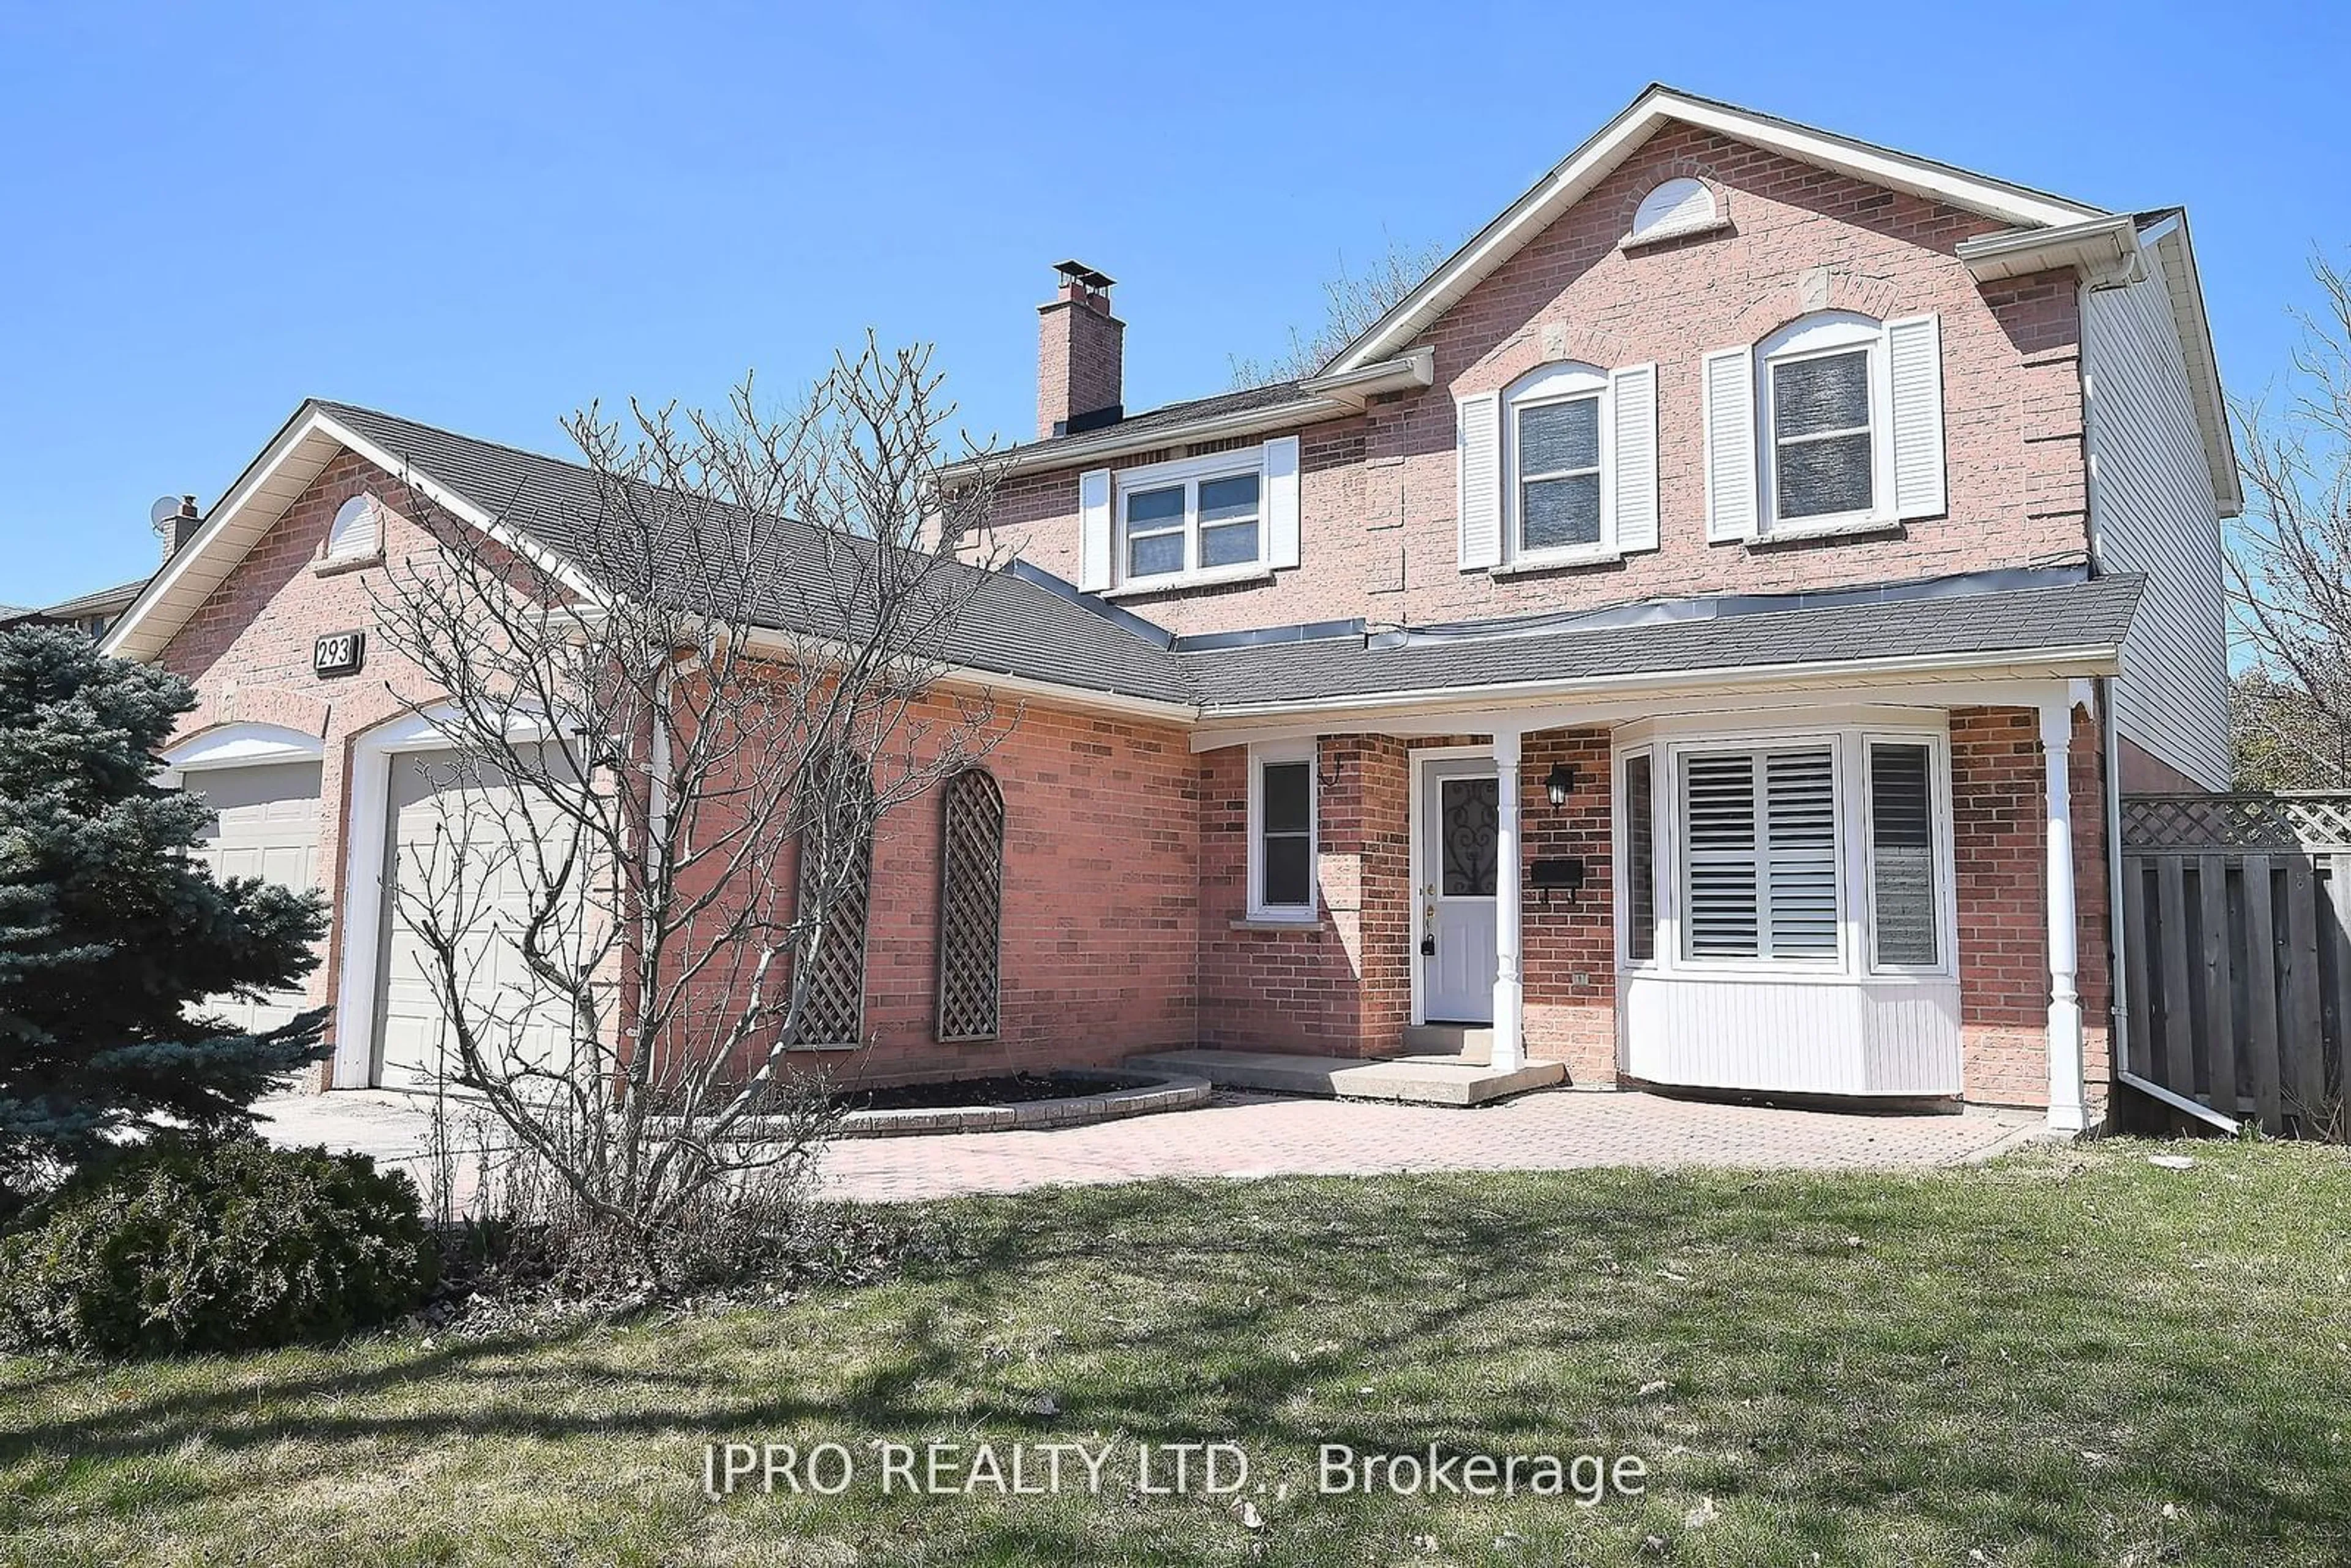 Home with brick exterior material for 293 O'Donoghue Ave, Oakville Ontario L6H 3W5